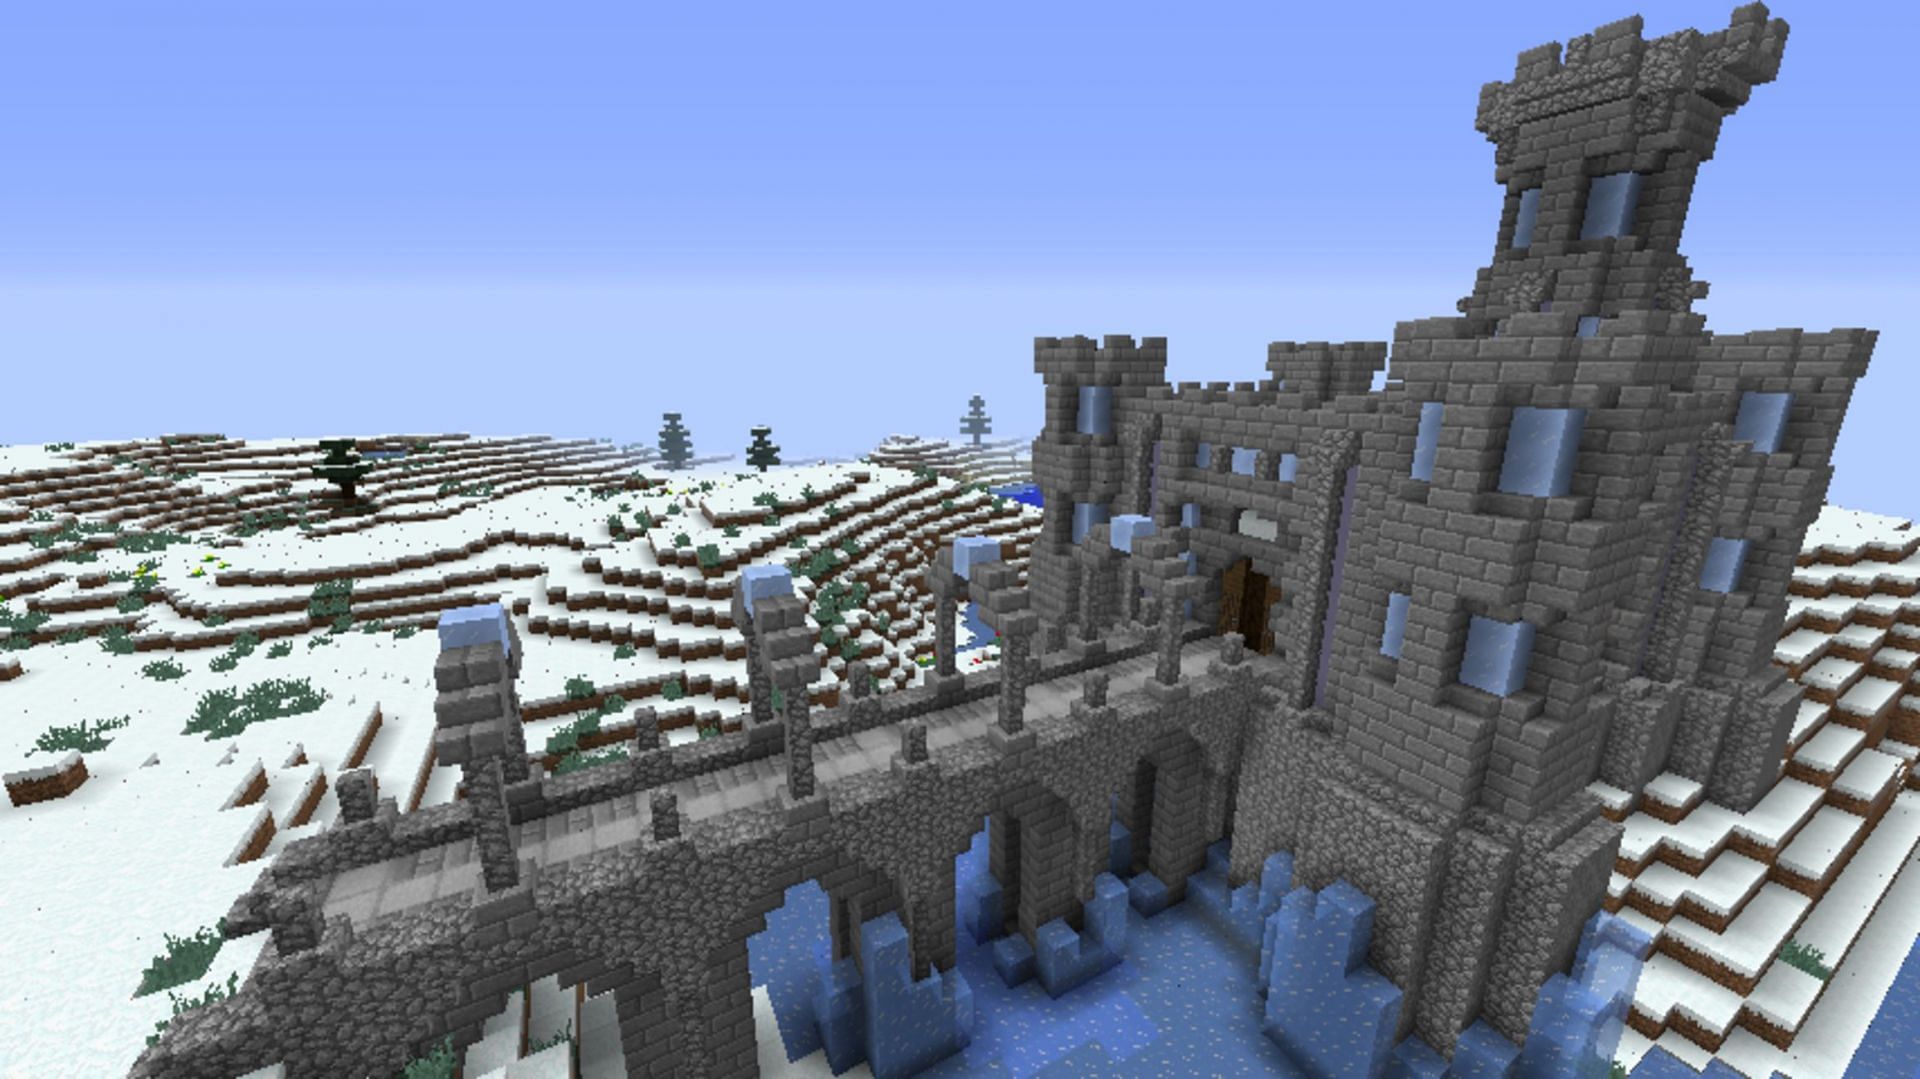 An icy stone brick castle built by a member of the community (Image via MissyMomo/Minecraft Forum)